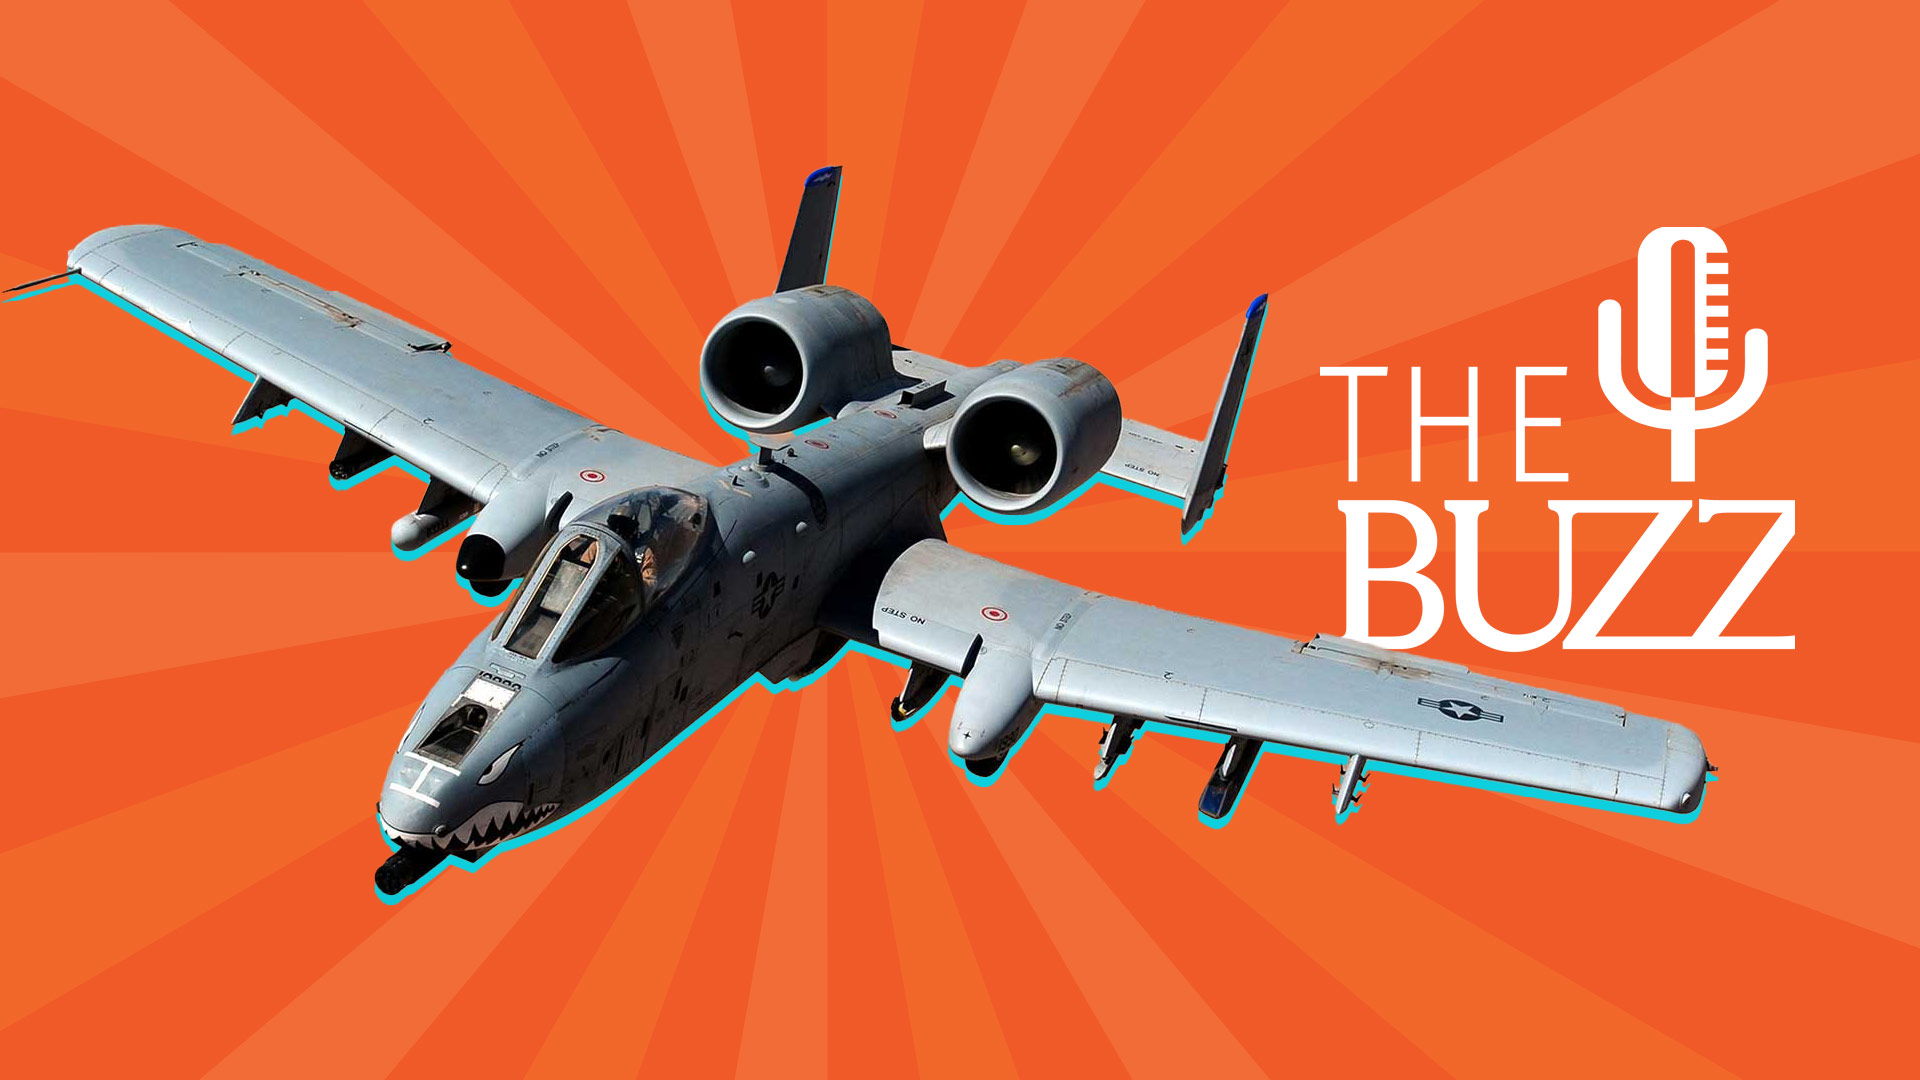 The Buzz (and the Davis Monthan Air Force Base) says goodbye to the A-10 warthog.